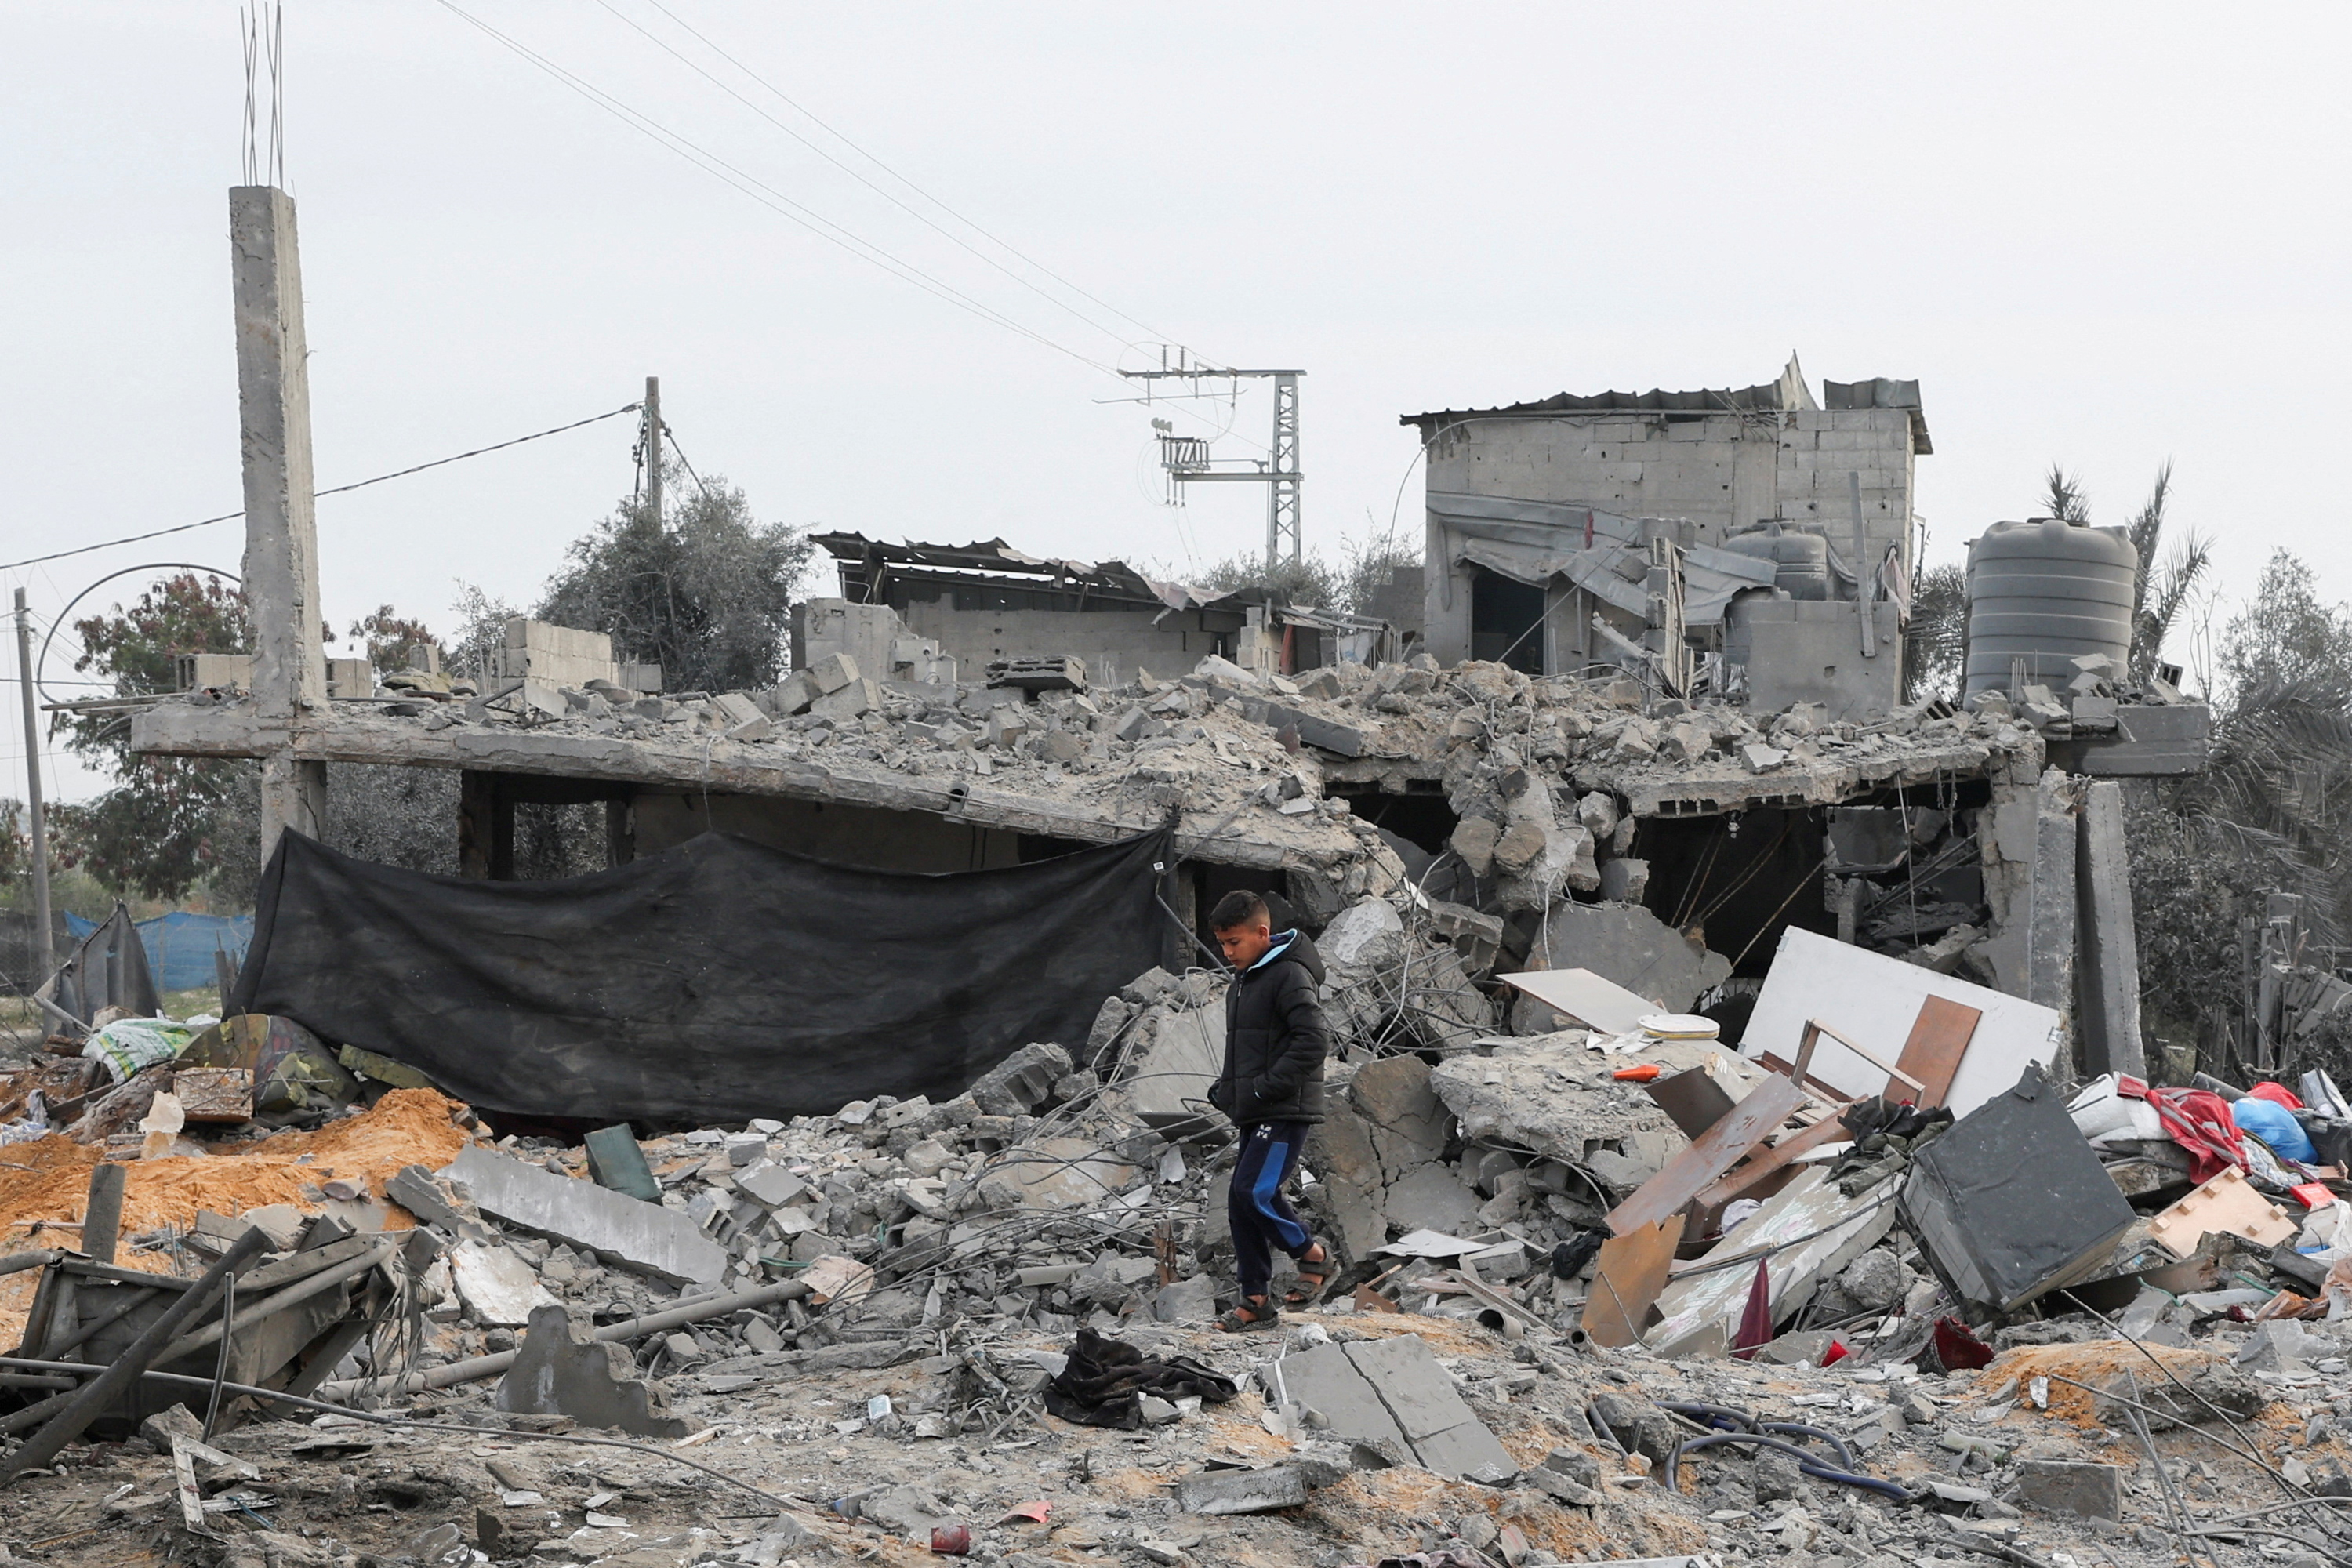 A Palestinian boy walks amidst the rubble at the site of an Israeli strike on a house, in Rafah, Gaza, on February 23.